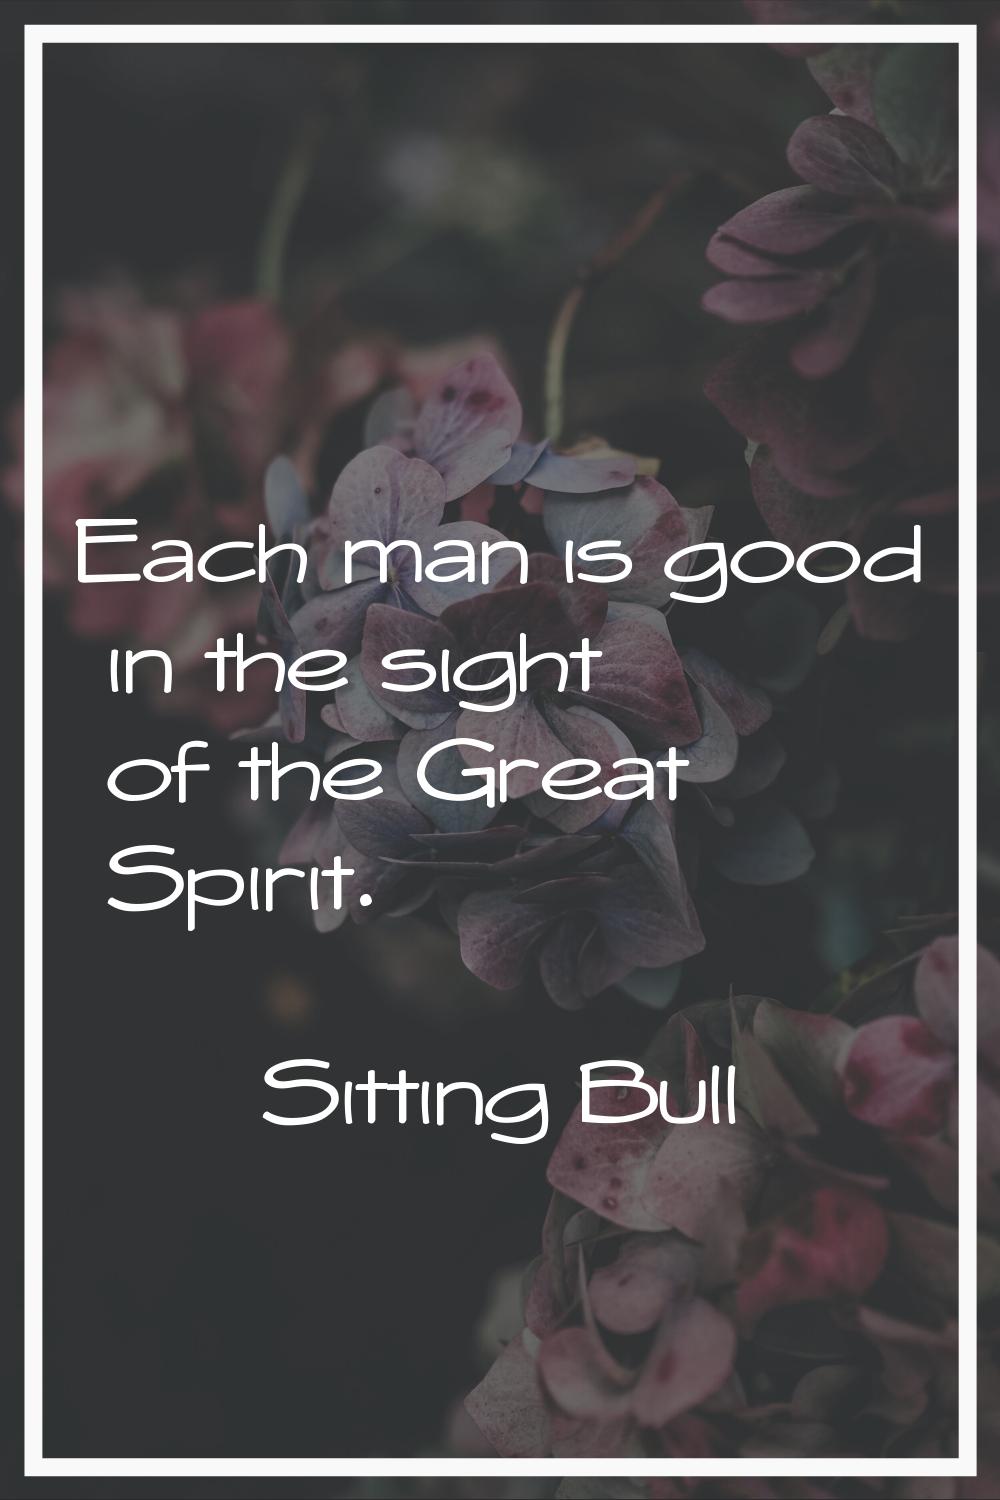 Each man is good in the sight of the Great Spirit.